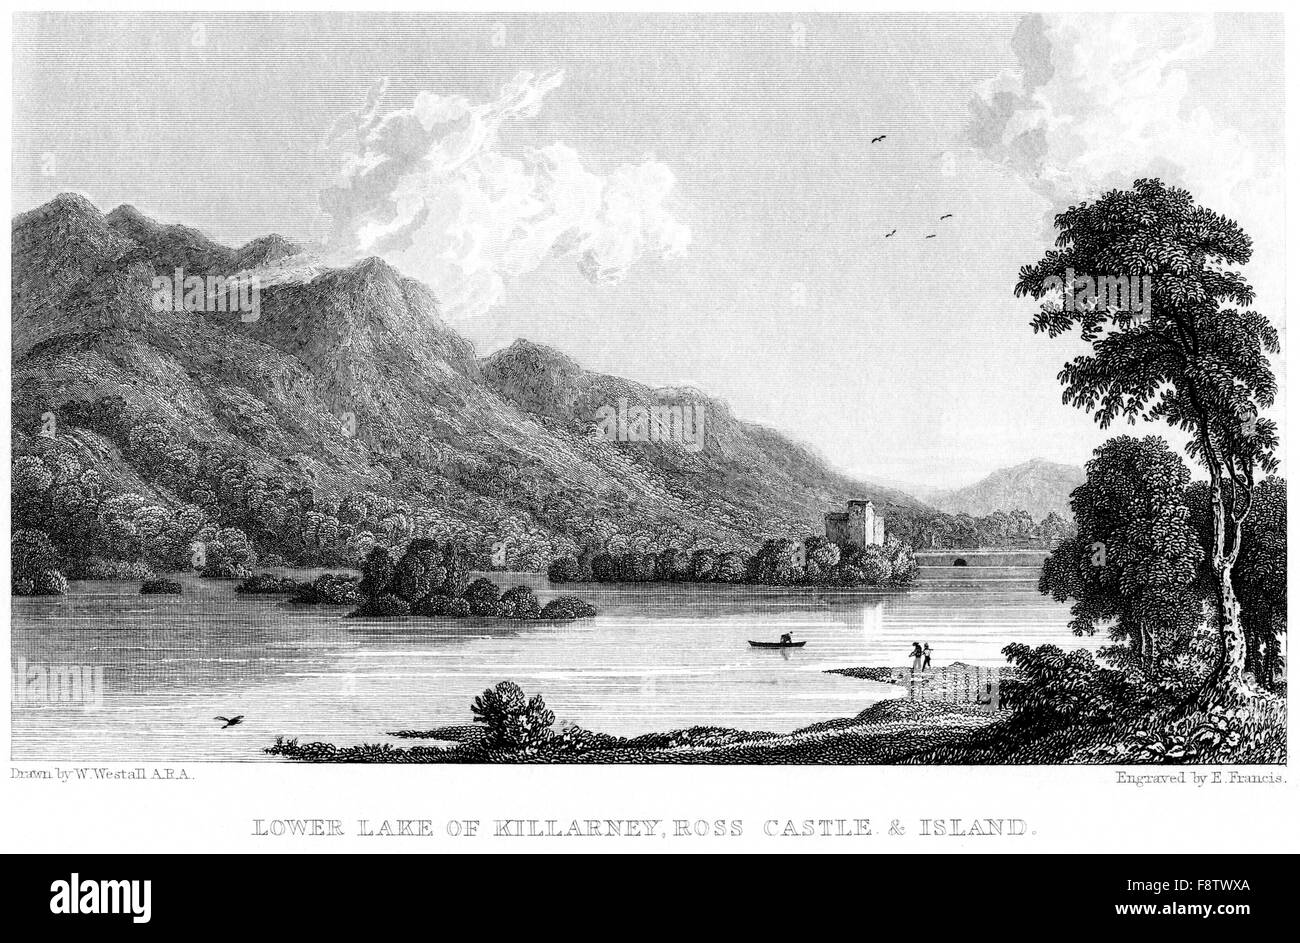 An engraving of Lower Lake of Killarney, Ross Castle & Island scanned at high resolution from a book printed in 1834. Stock Photo